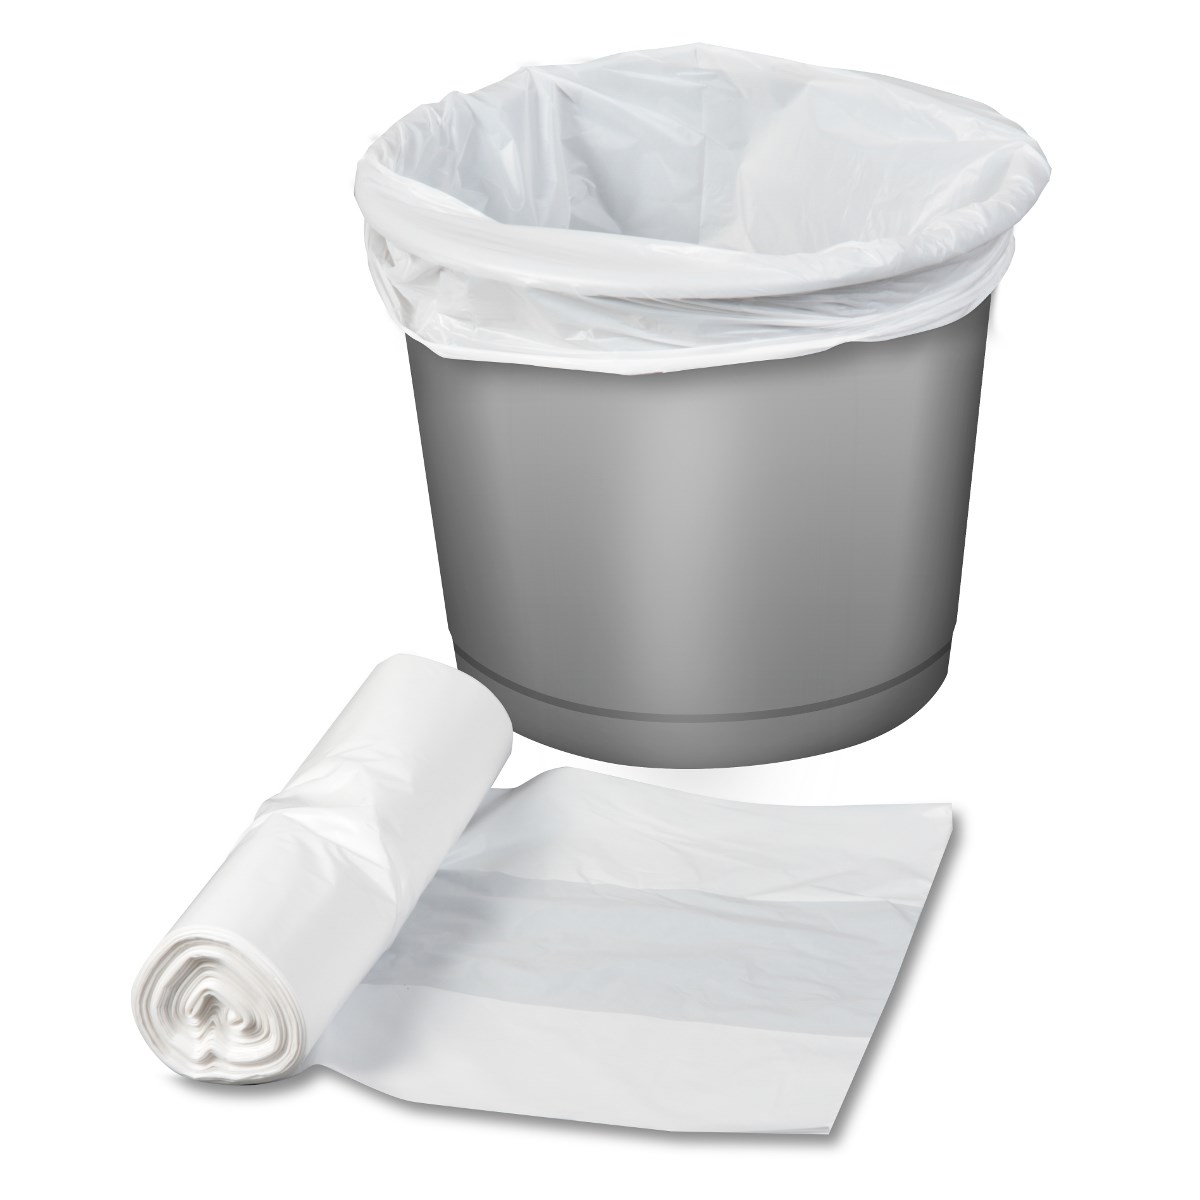 Earth 2 Earth Plastic Compostable Degradable Bin Bags - Best Buys, Bin Bags  Eco, Coloured Bags, Creche and Childcare, Dentistry Hygiene Supplies, Eco  Cleaning Products, Healthcare Products, Kitchen Cleaning, Nursing Home  Hygiene